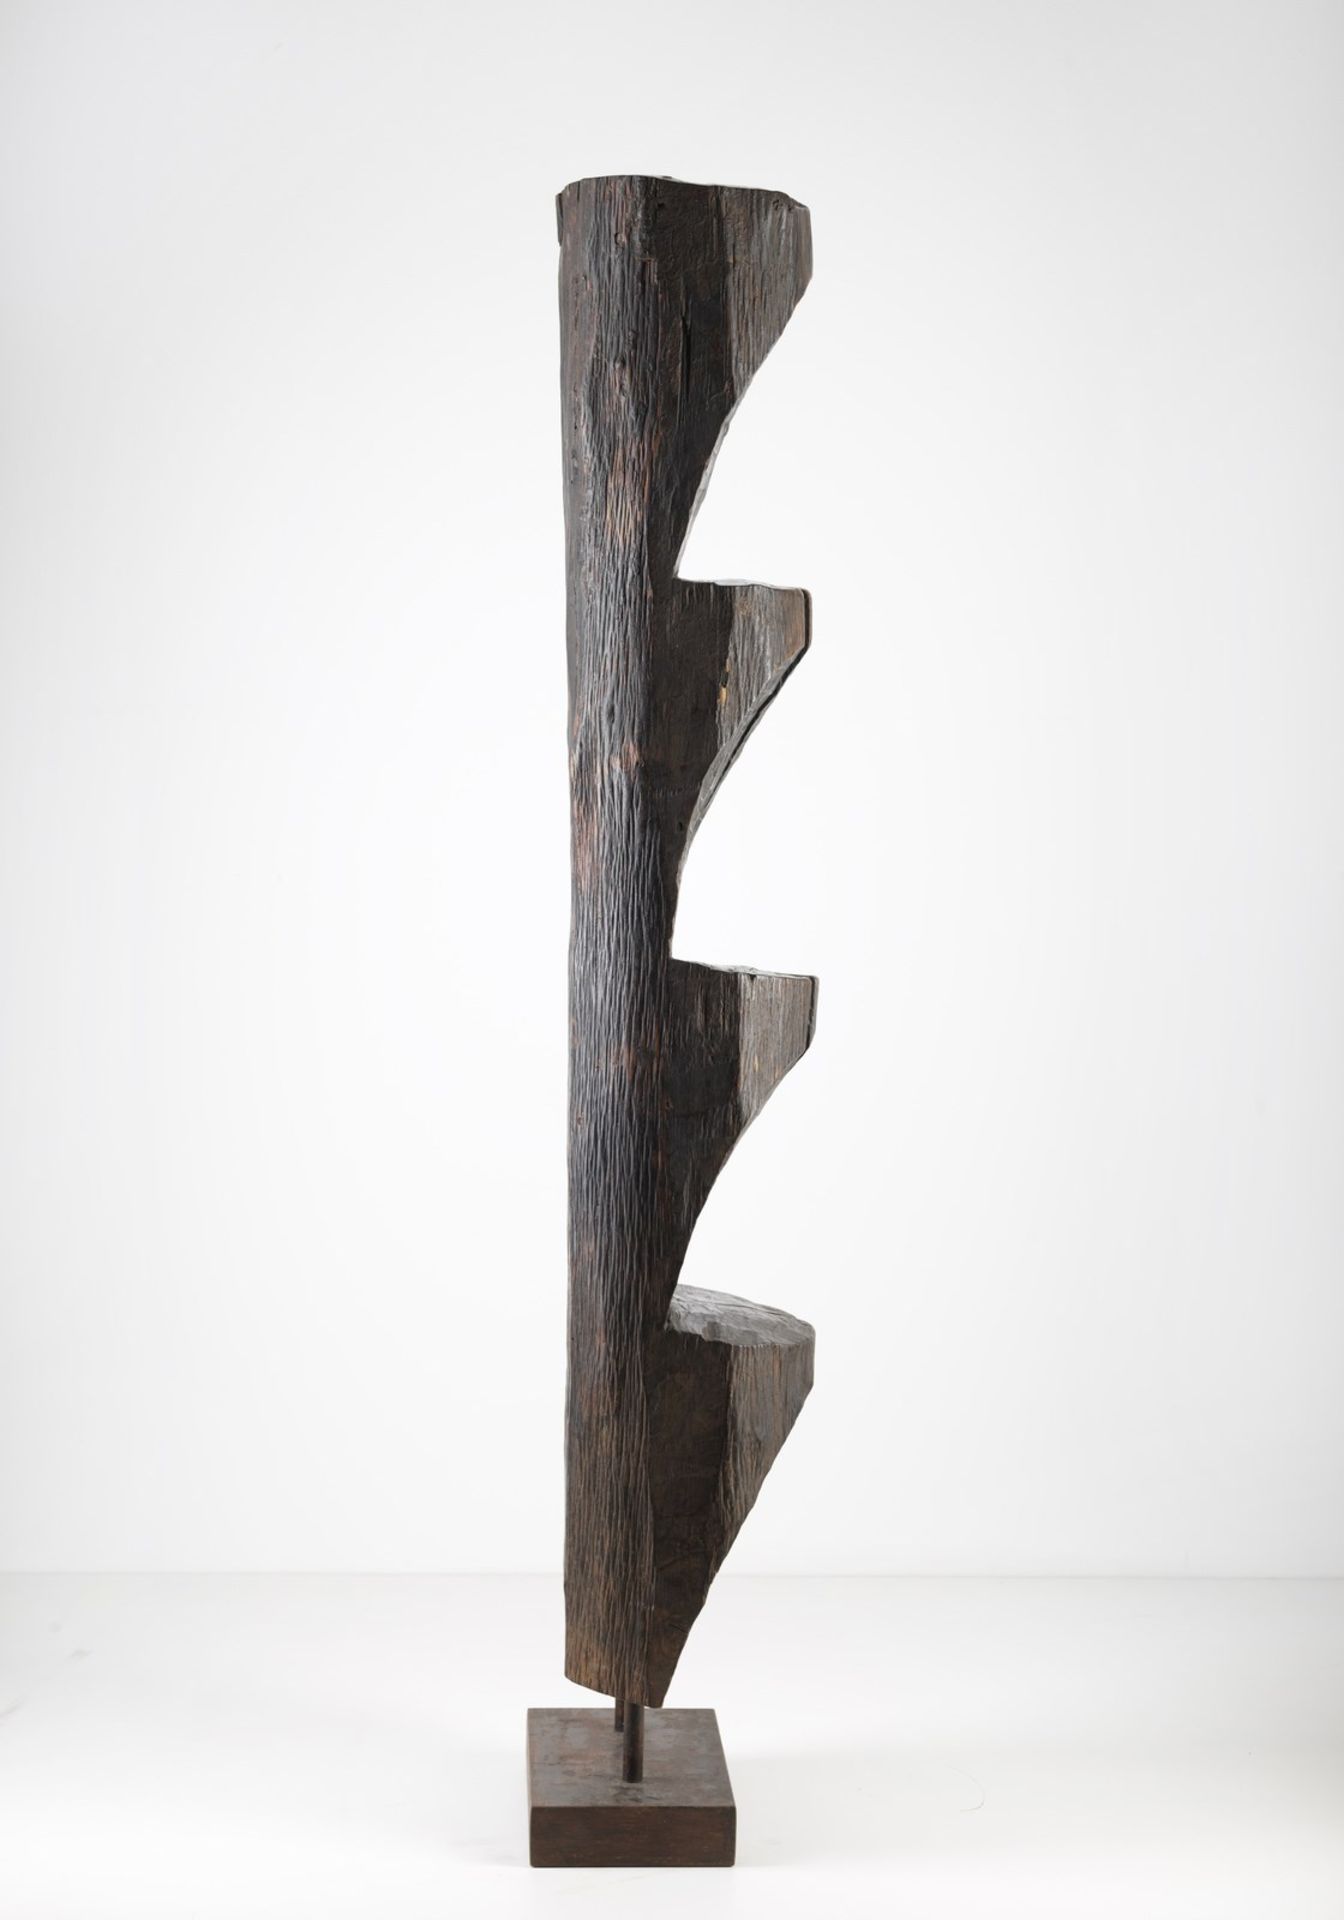 Naturalia A wooden staircaseTibet, 19th century. - Image 2 of 3